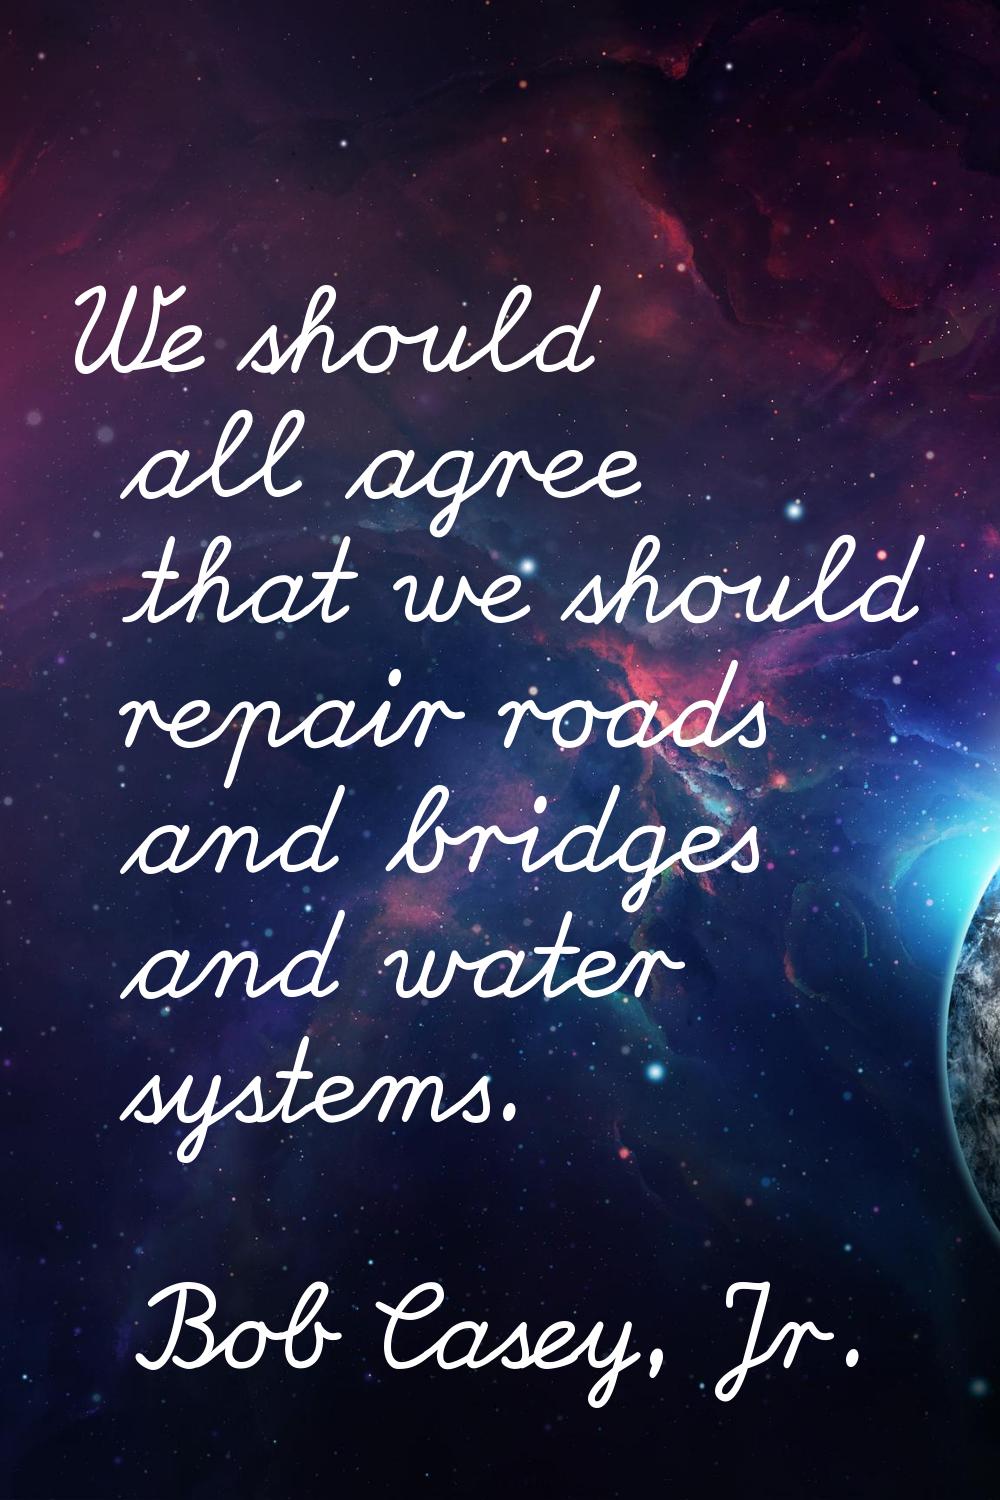 We should all agree that we should repair roads and bridges and water systems.